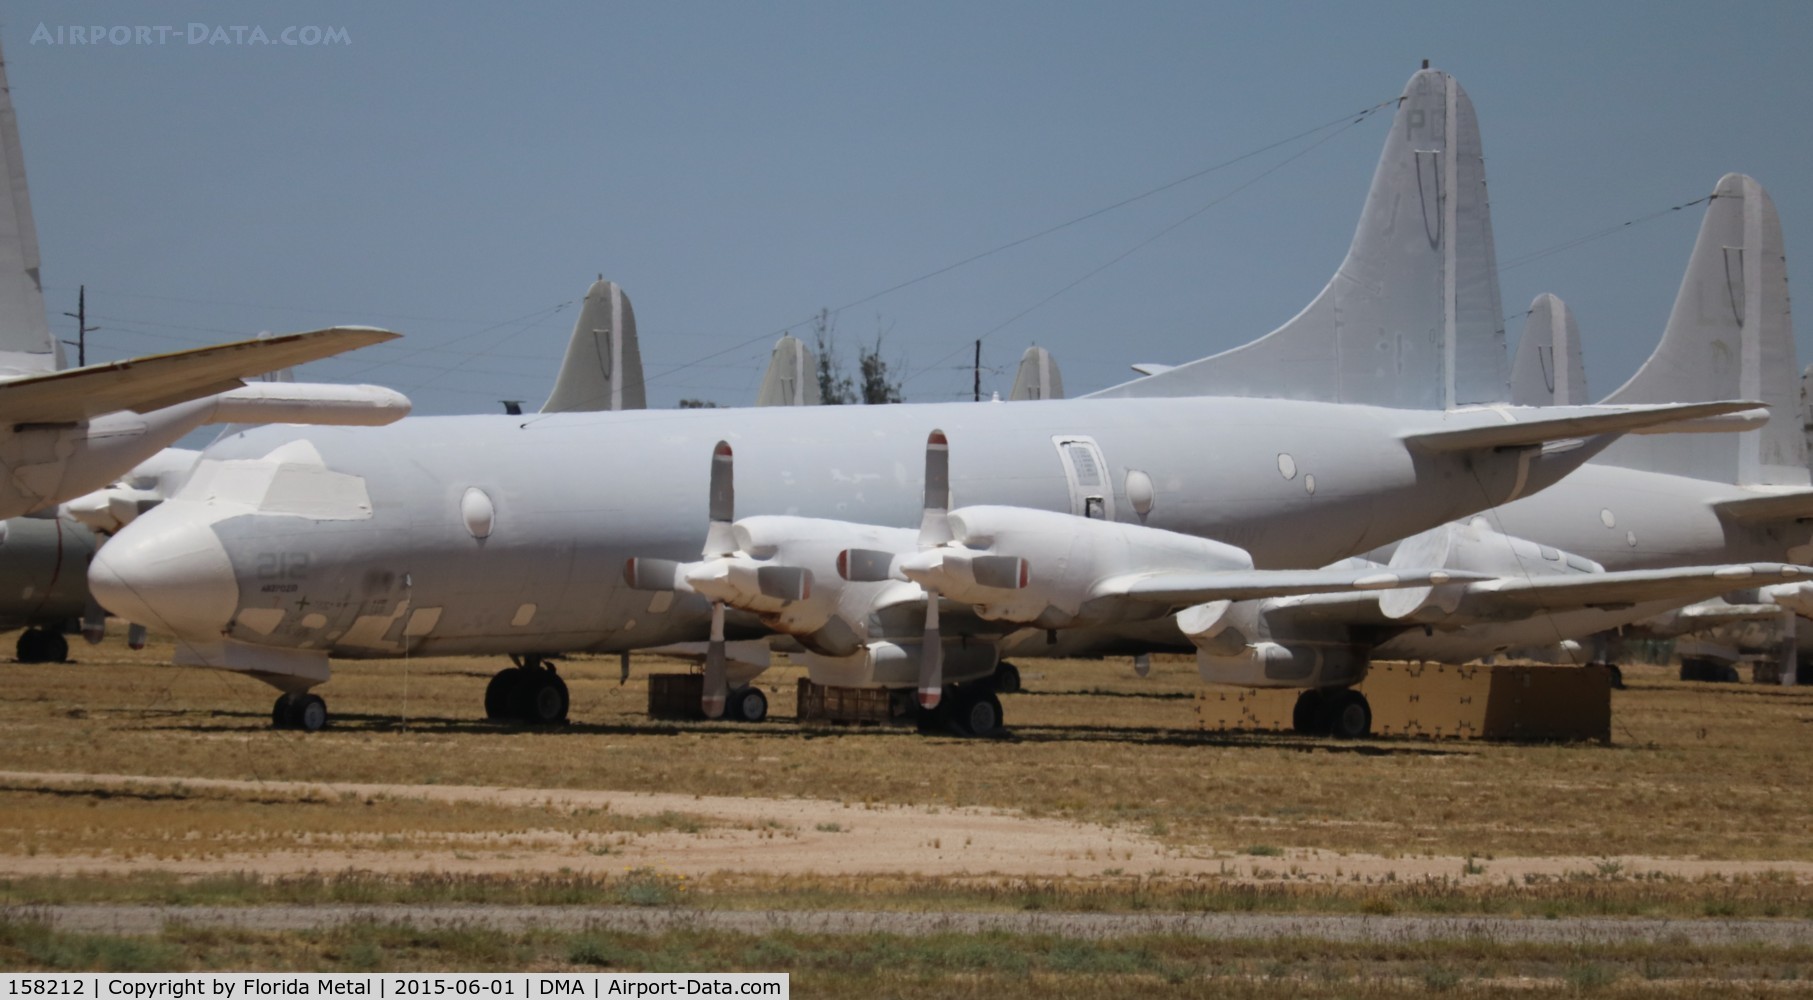 158212, Lockheed P-3C Orion C/N 285A-5557, P-3C Orion